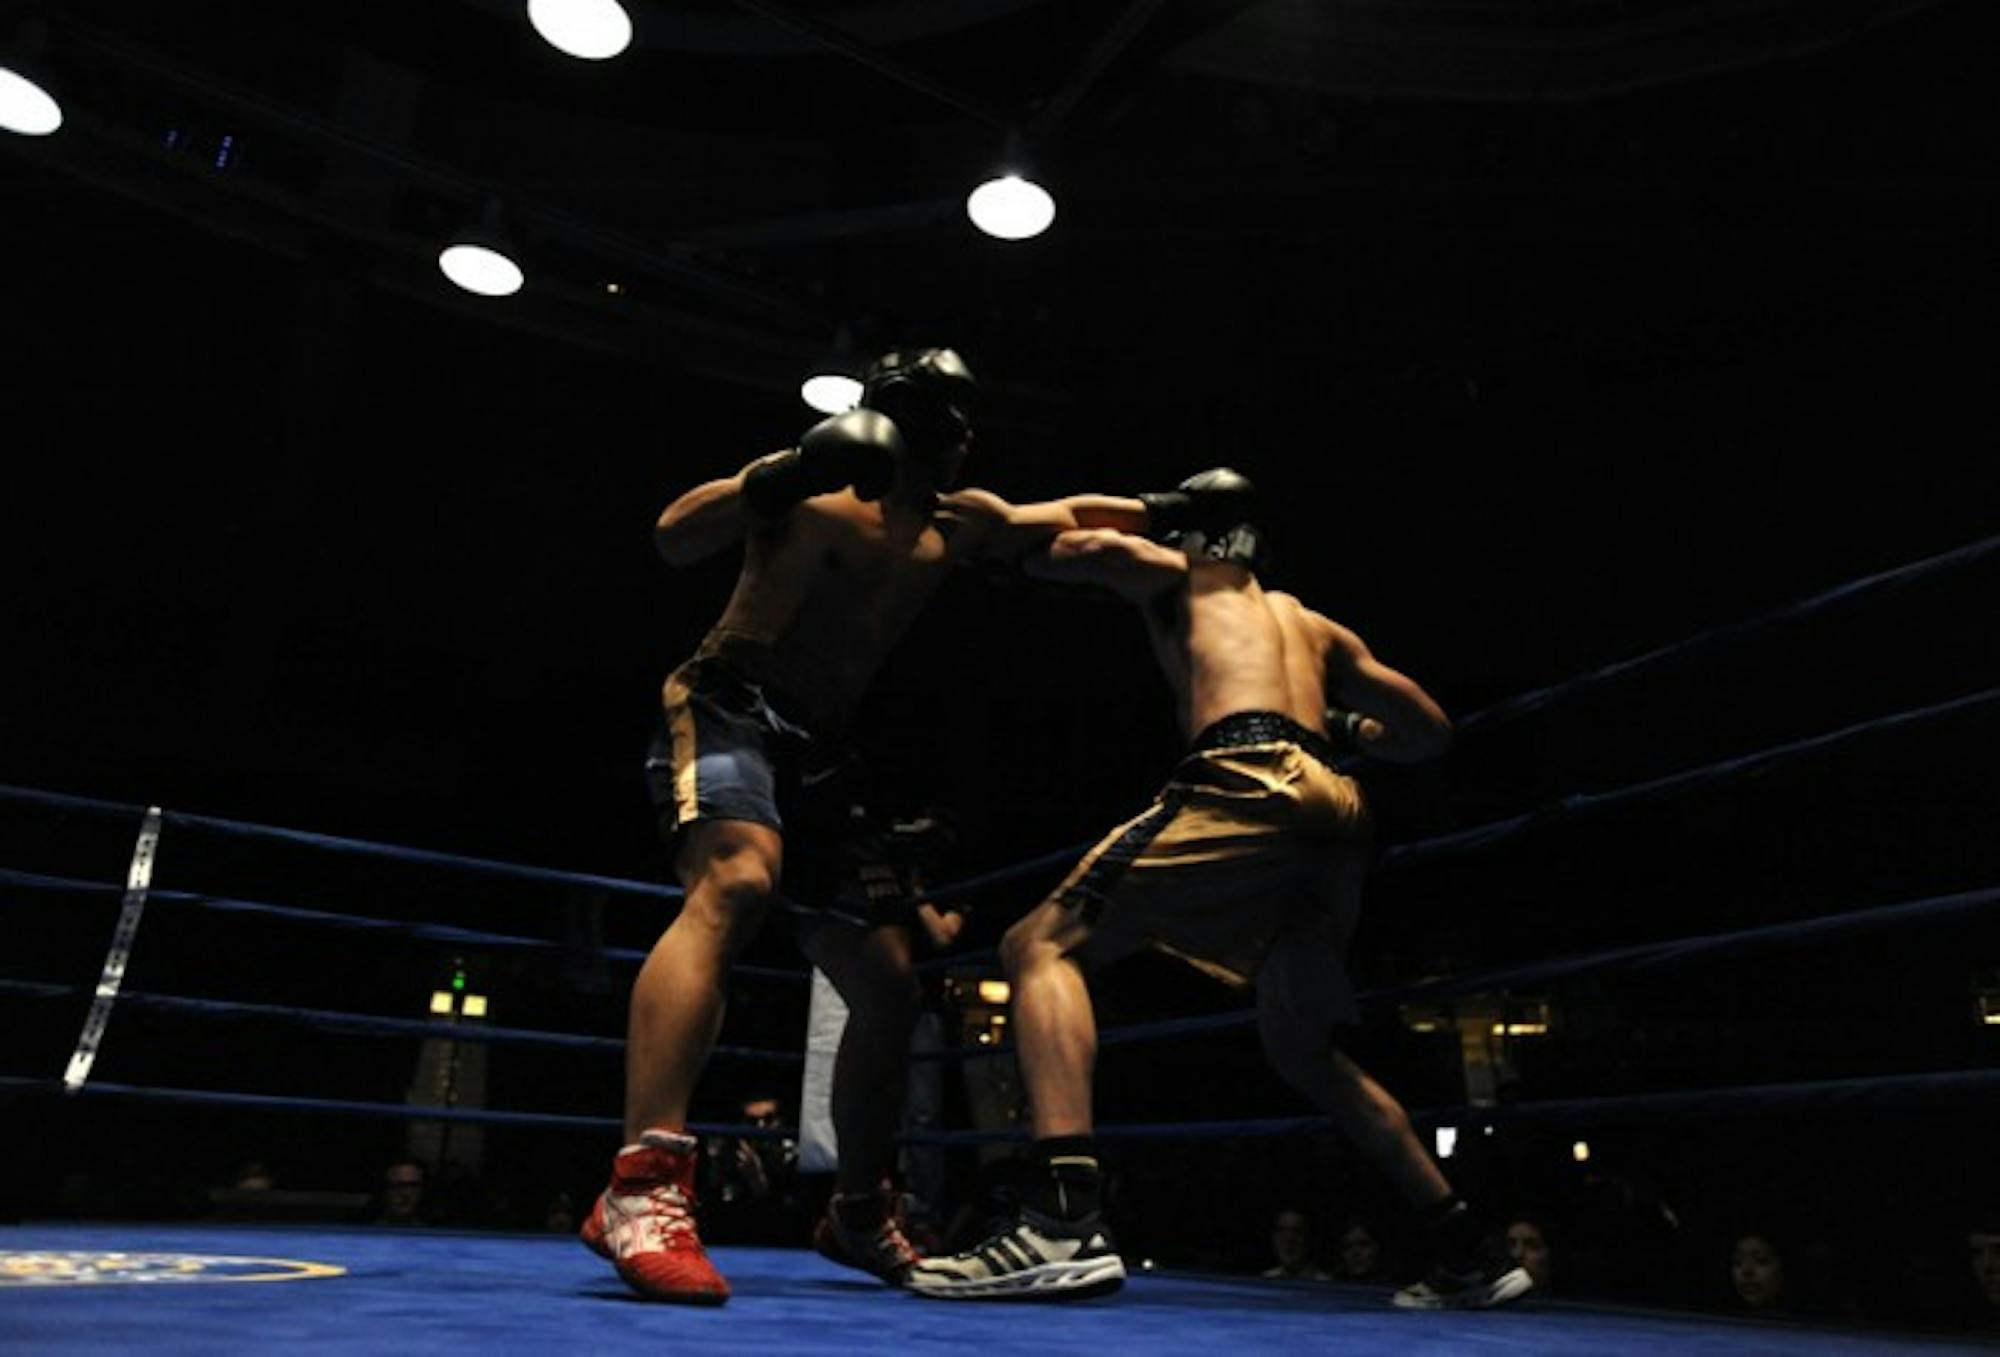 Senior captain Daniel Yi (left) lands a jab to Mike Broghammer's head in the 2013 Bengal Bouts heavyweight final March 1, which Yi won by knock out.